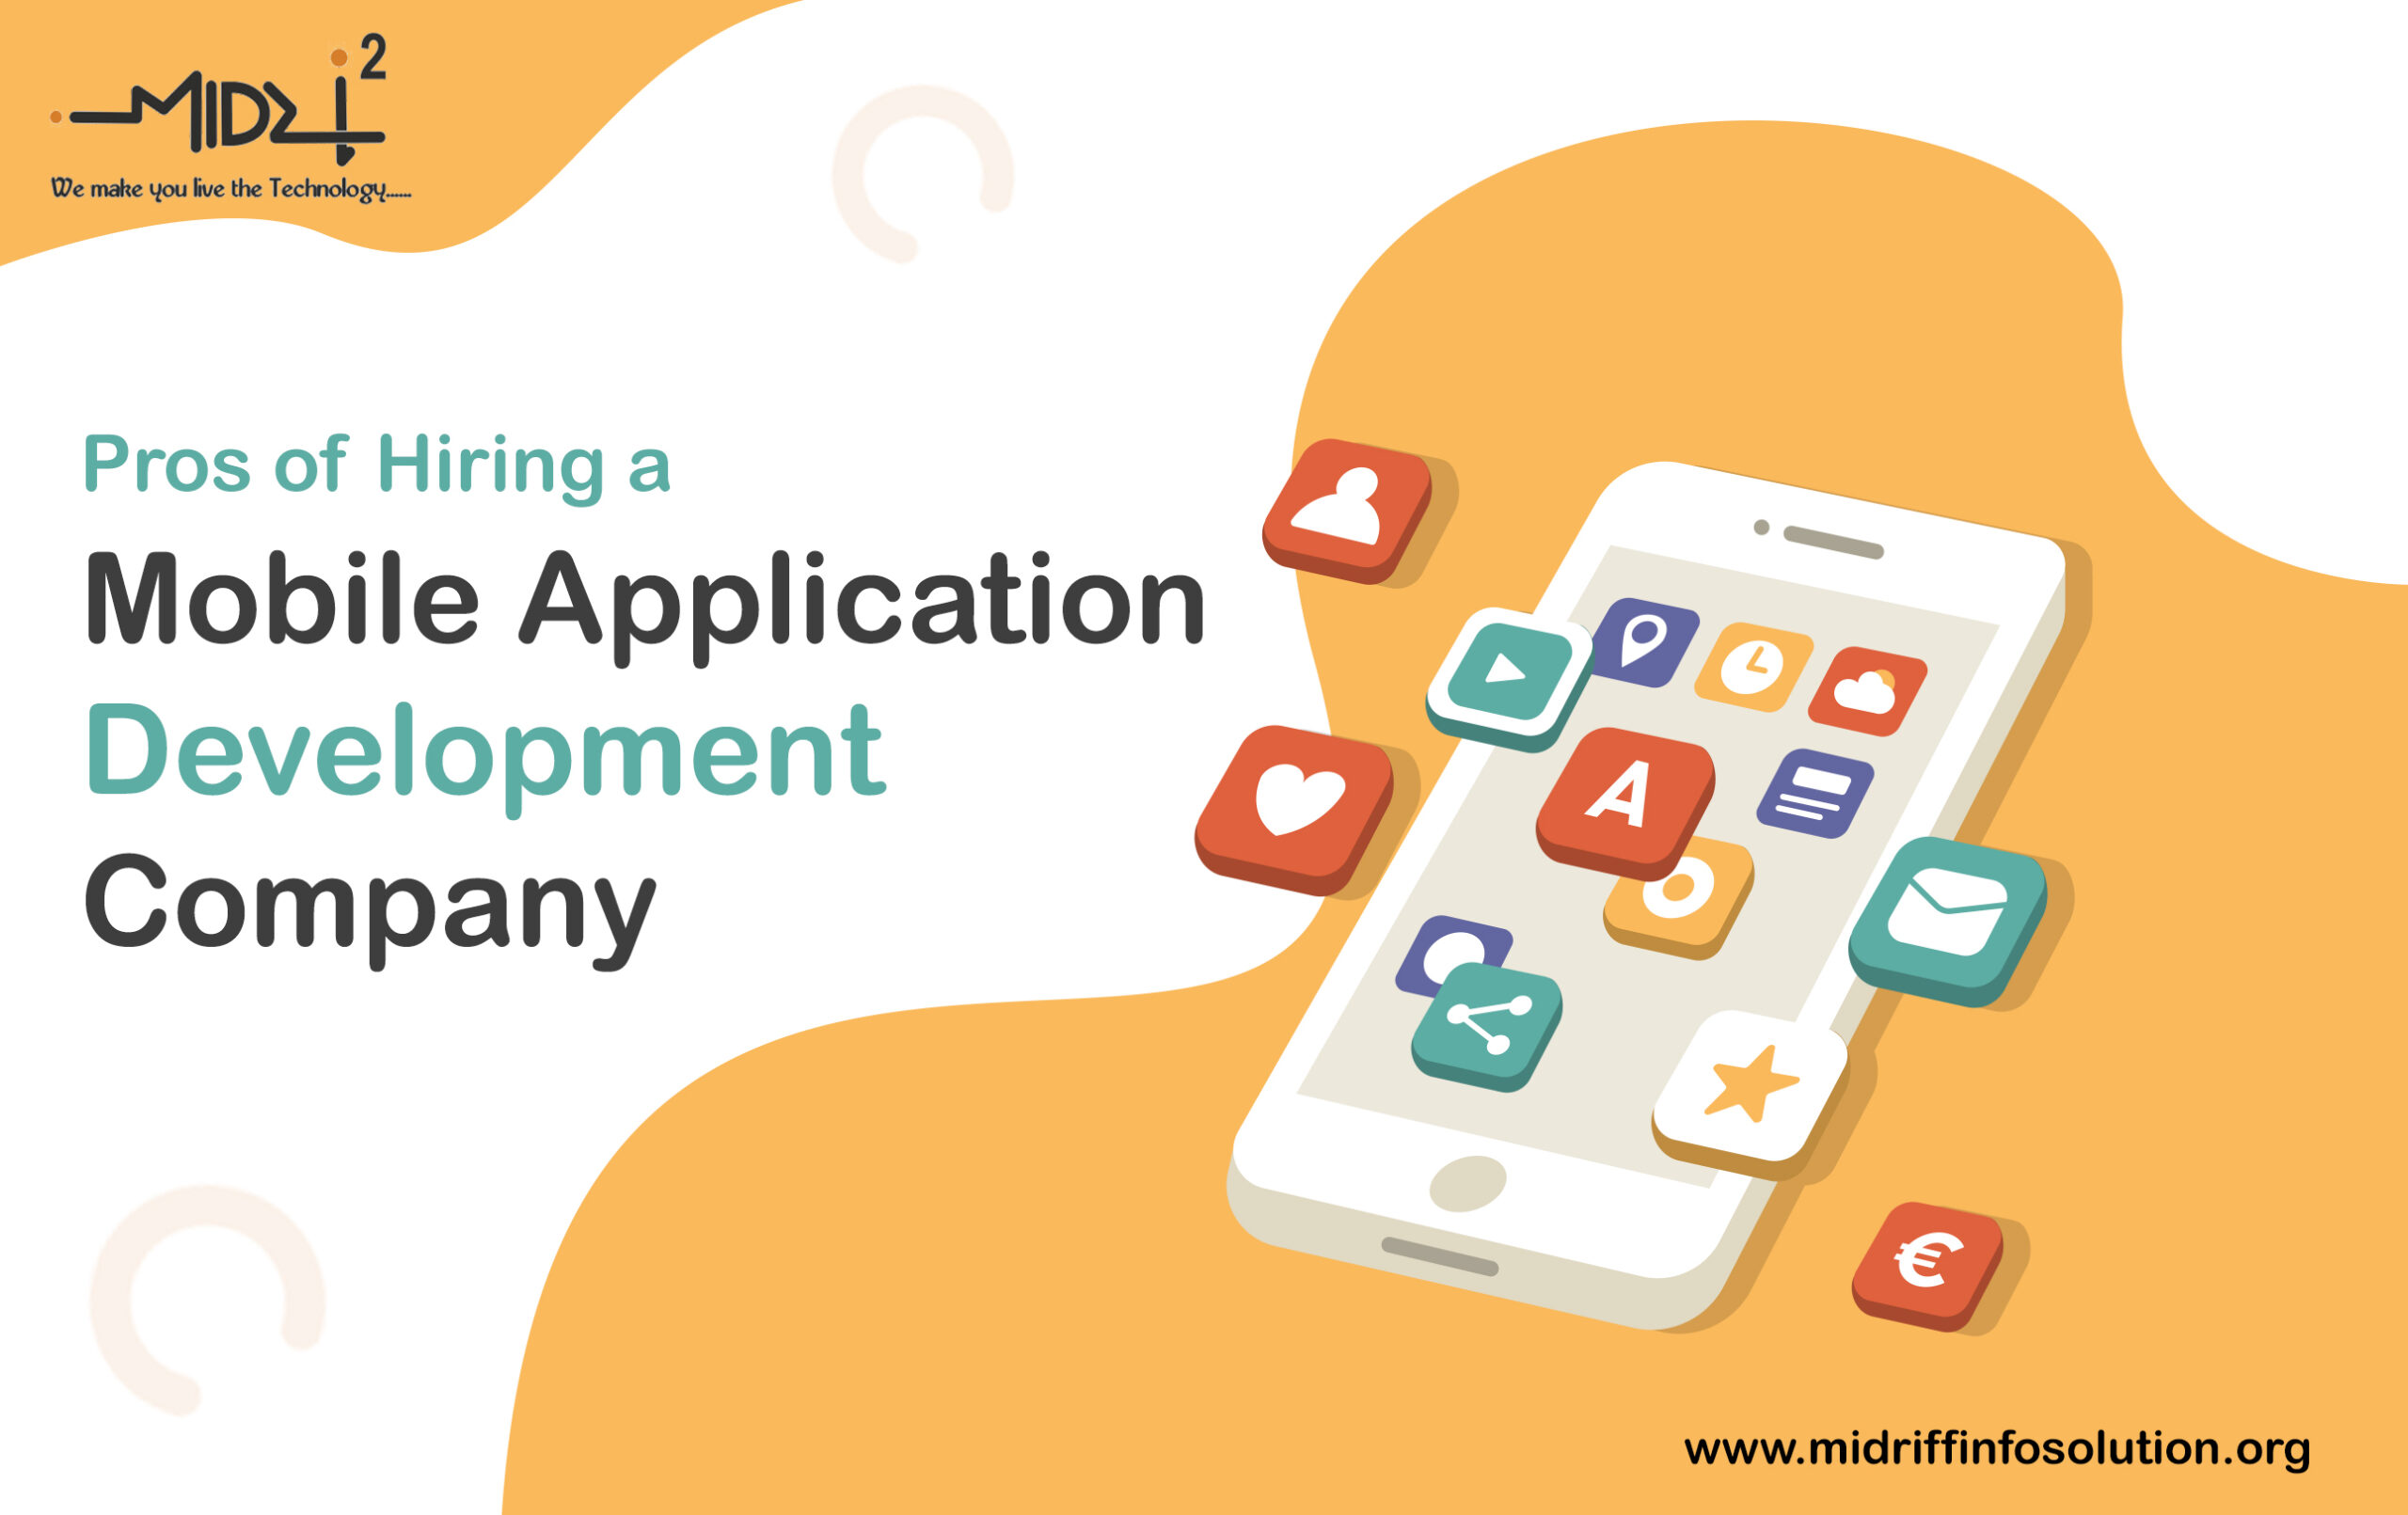 Pros of Hiring a Mobile Application Development Company